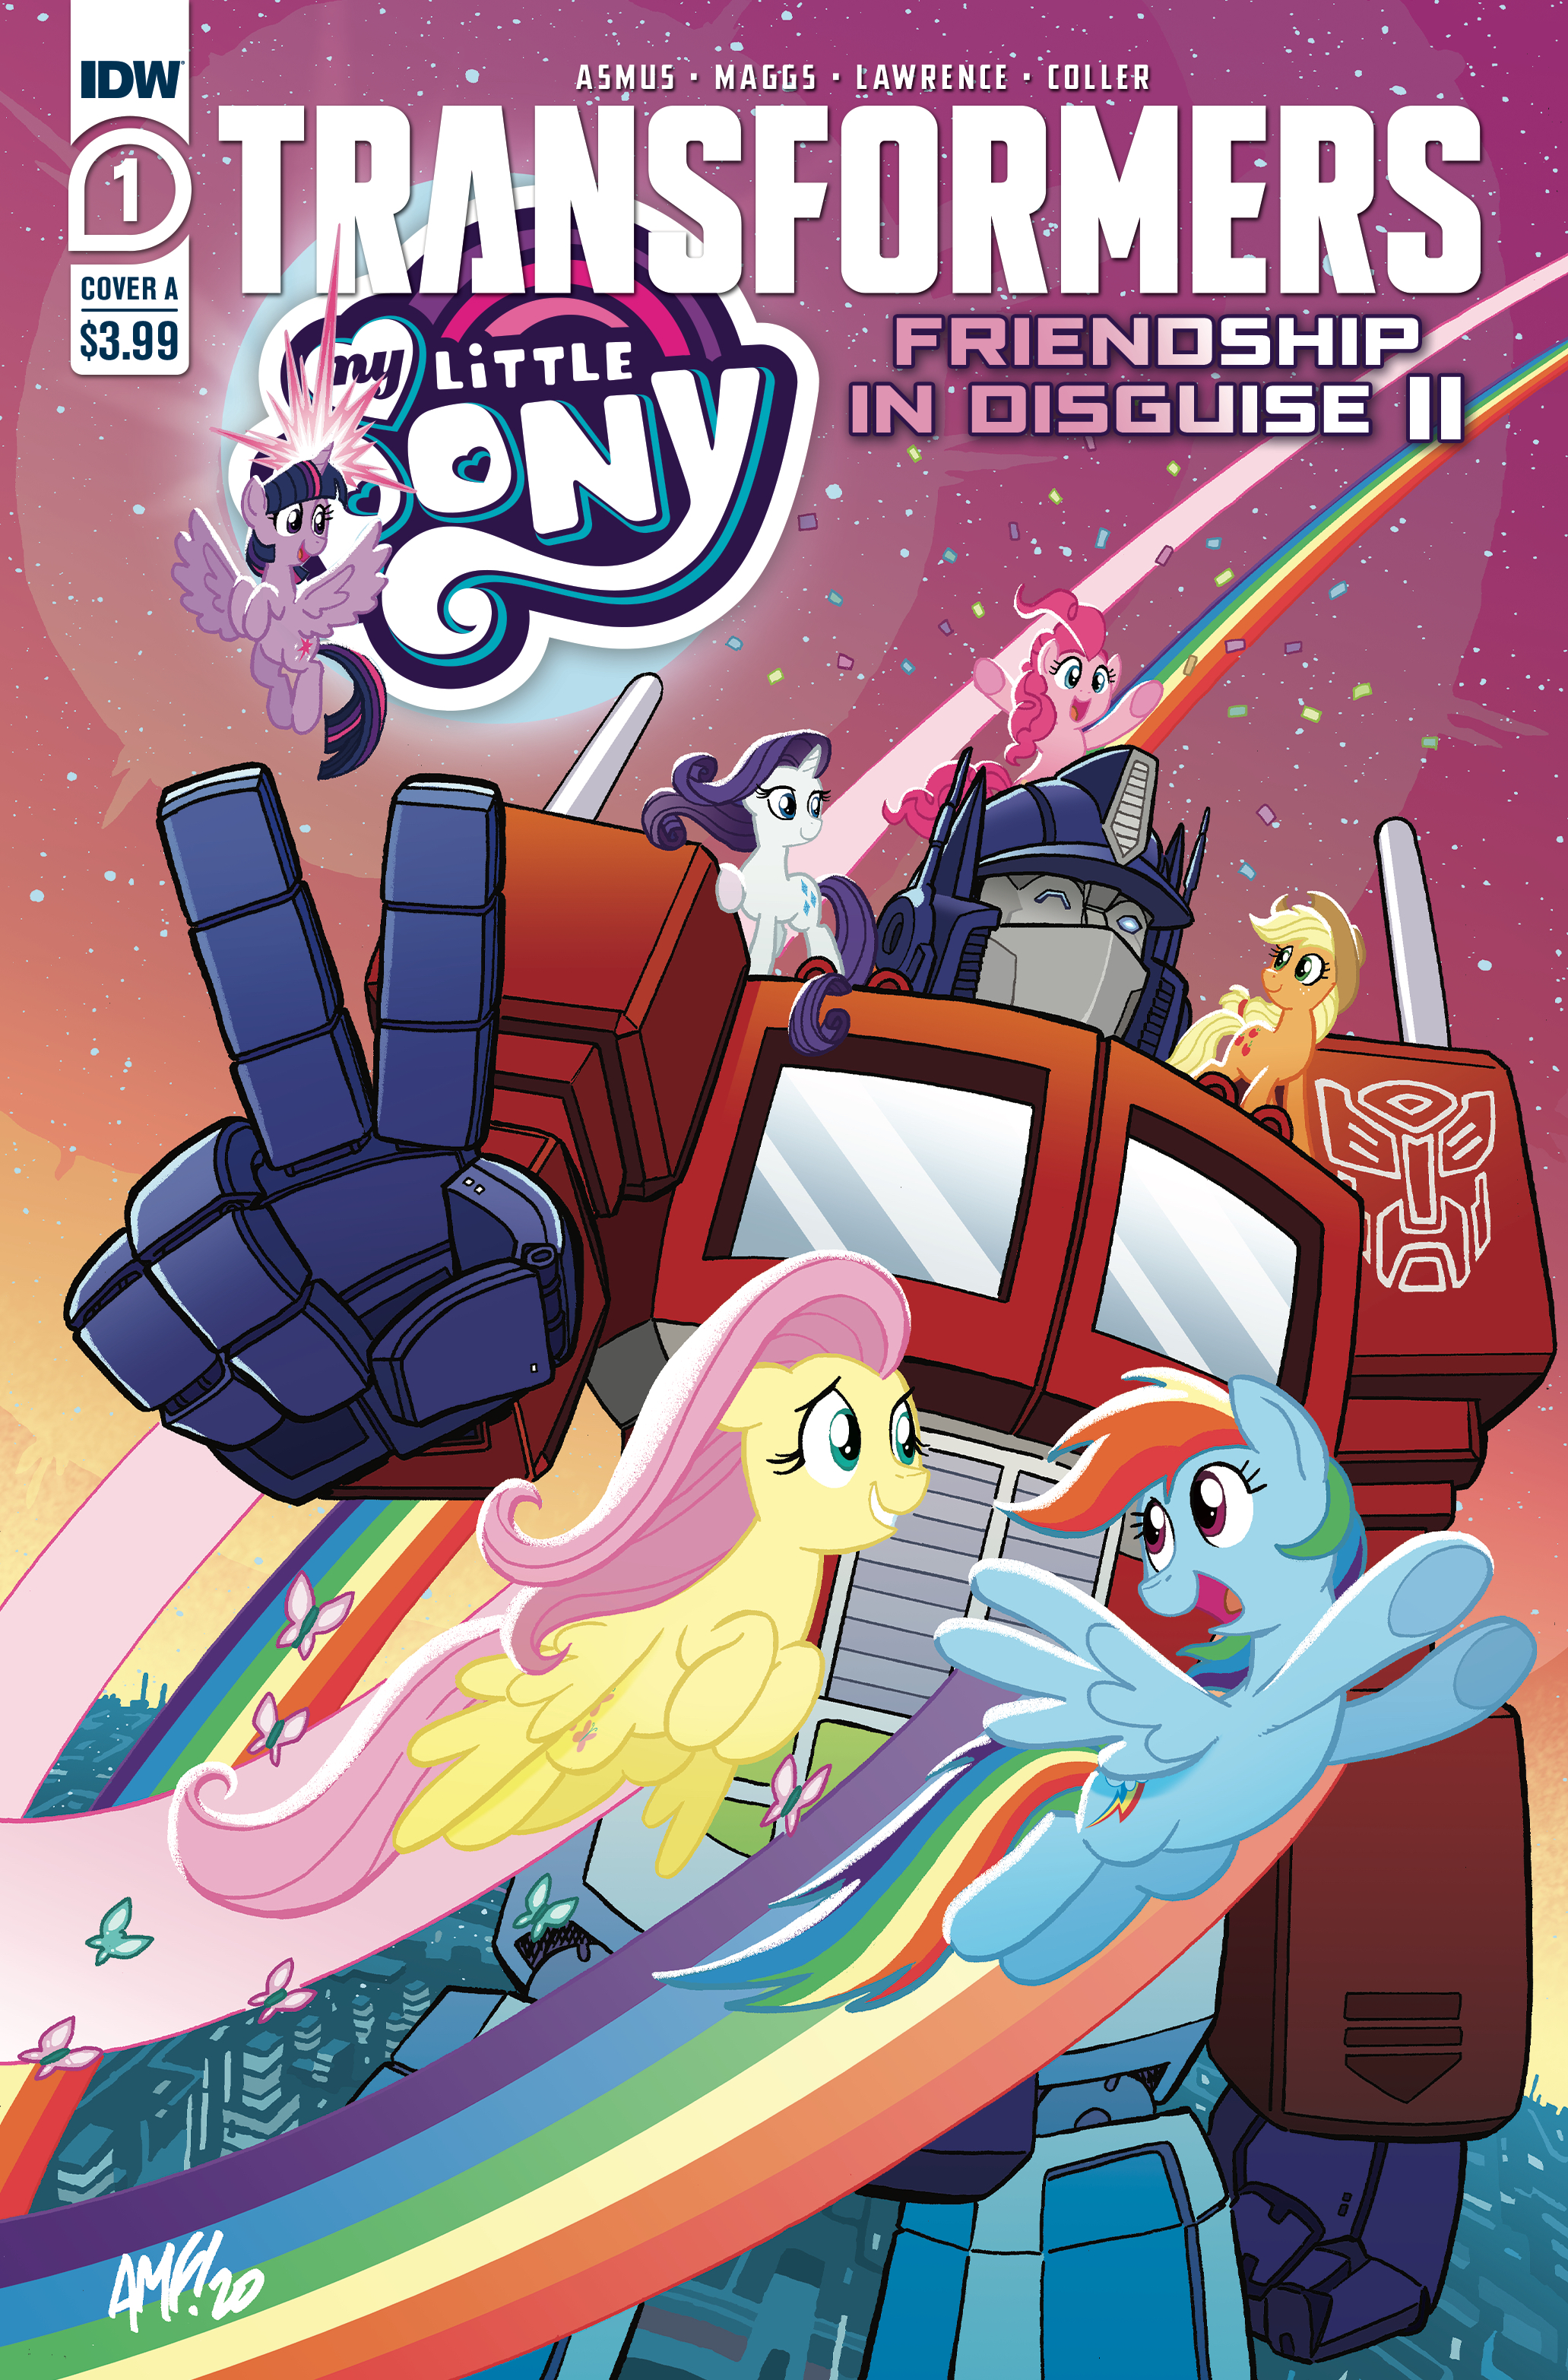 MY LITTLE PONY FRIENDSHIP IS MAGIC #79 COVER A NM 1ST PRINT IDW 2019 